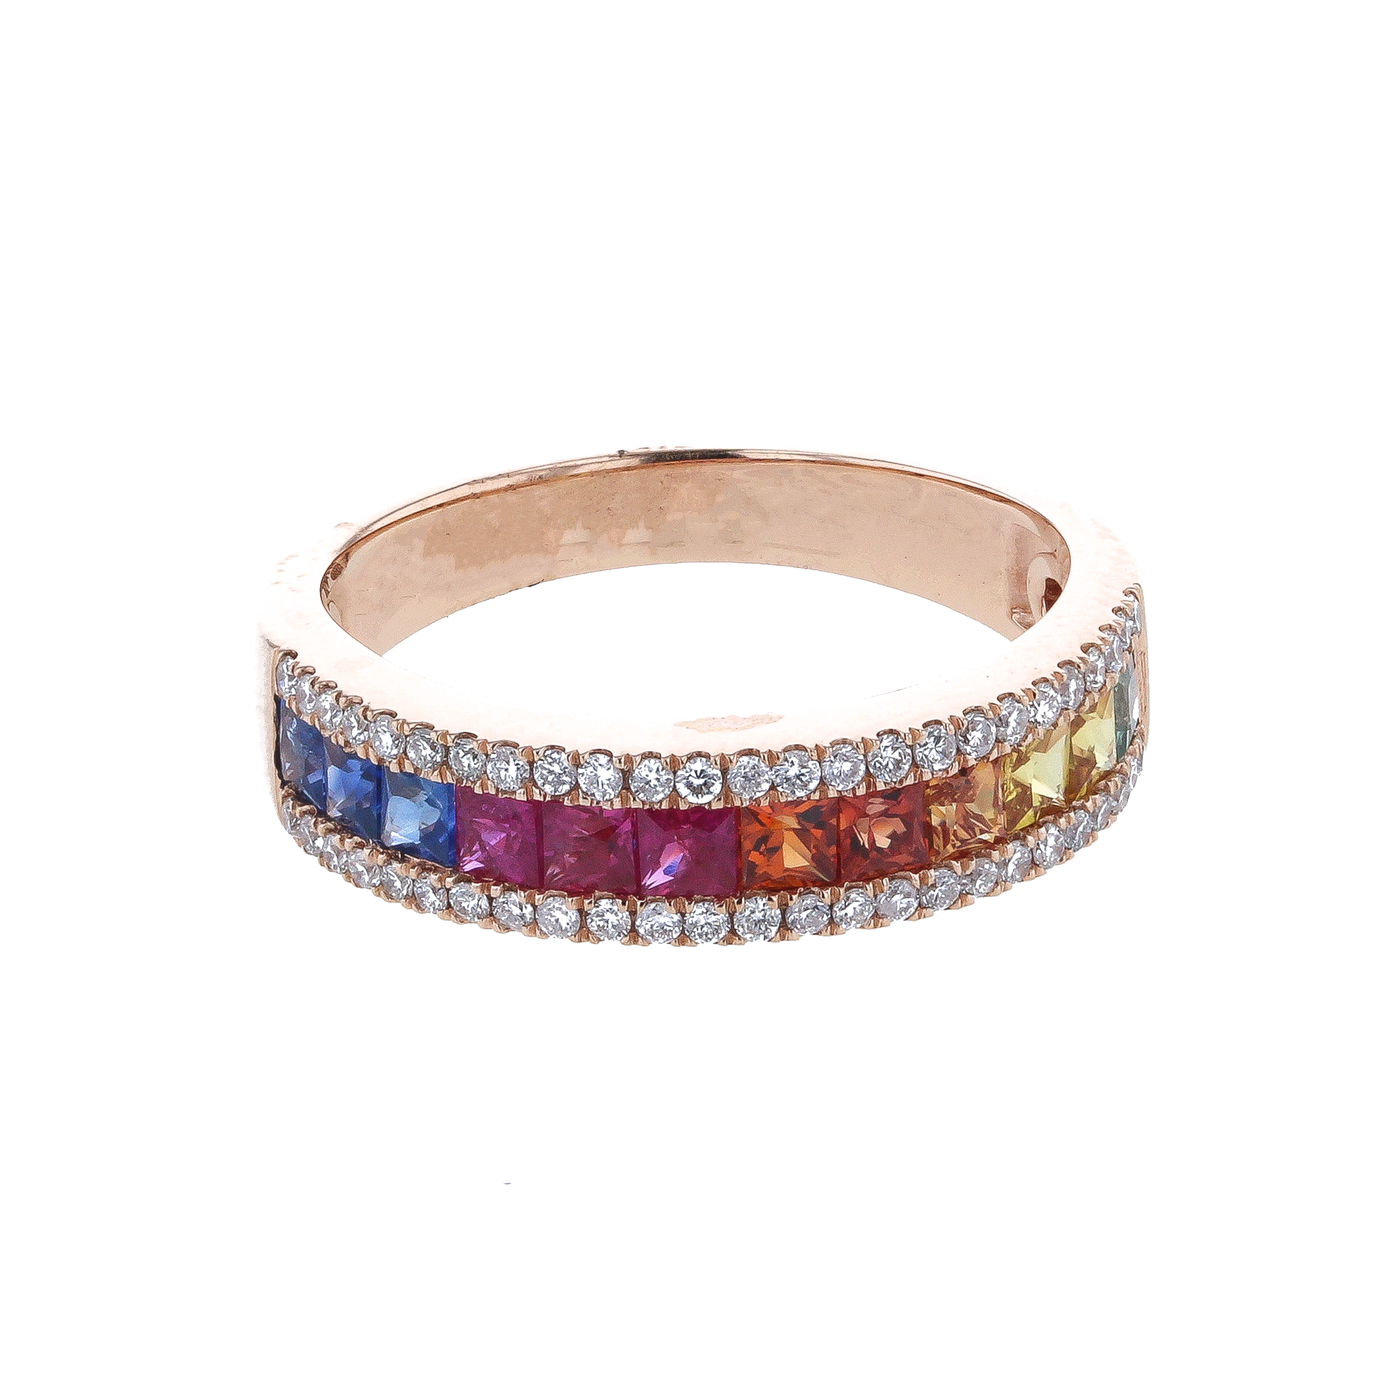 "Chasing Rainbows" .25 CTTW Diamond and .99 CTTW Multi Gemstone Ring in 18K Rose Gold